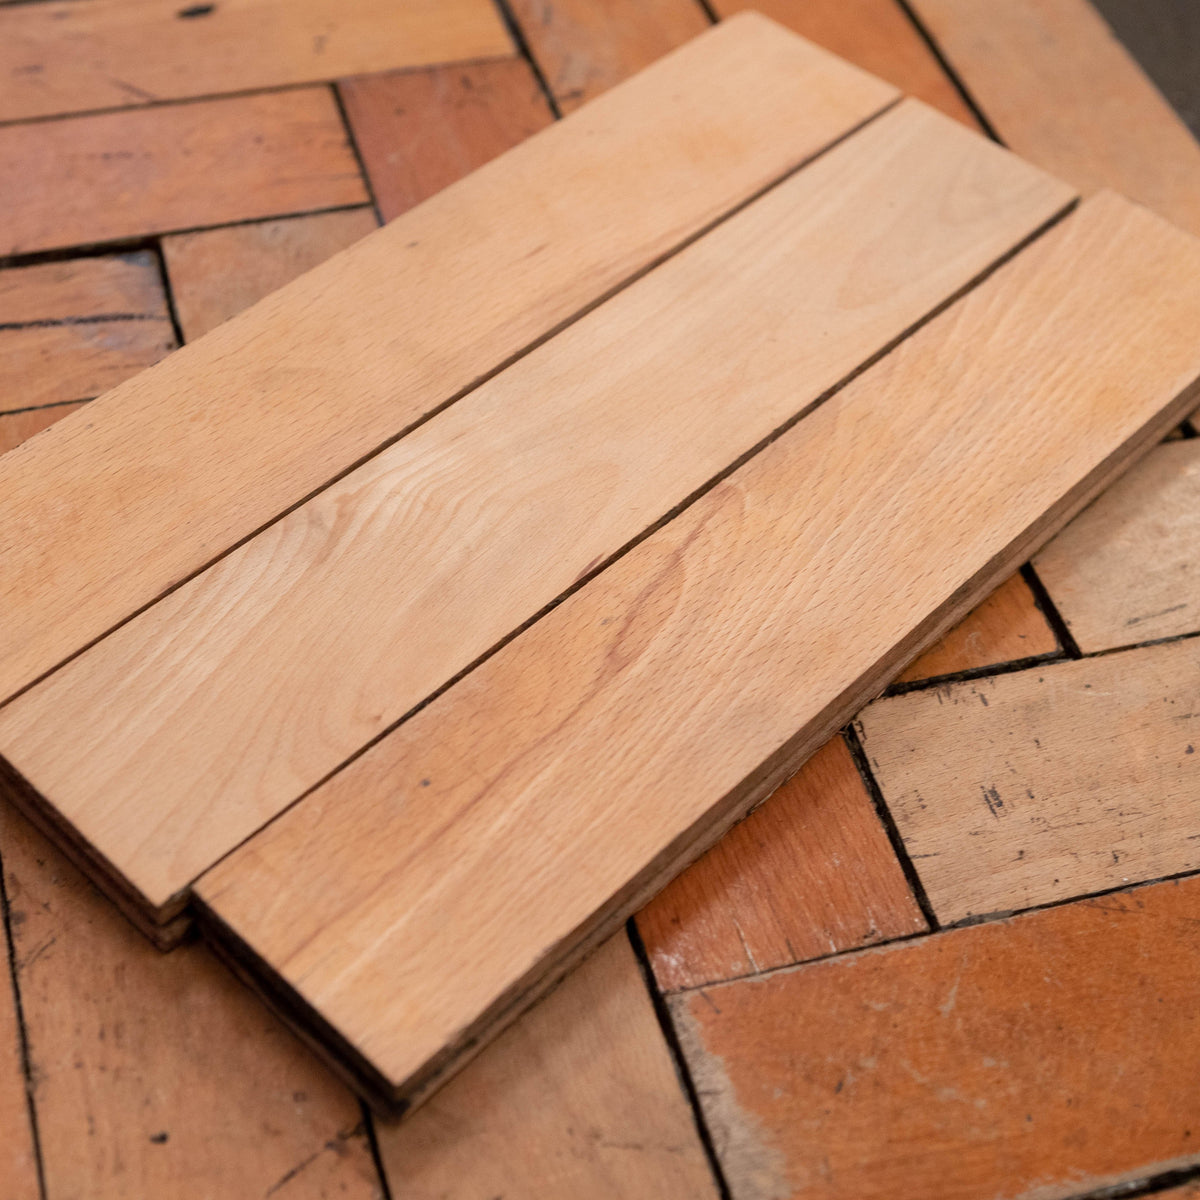 Reclaimed Beech Parquet Flooring 70m² Available | The Architectural Forum